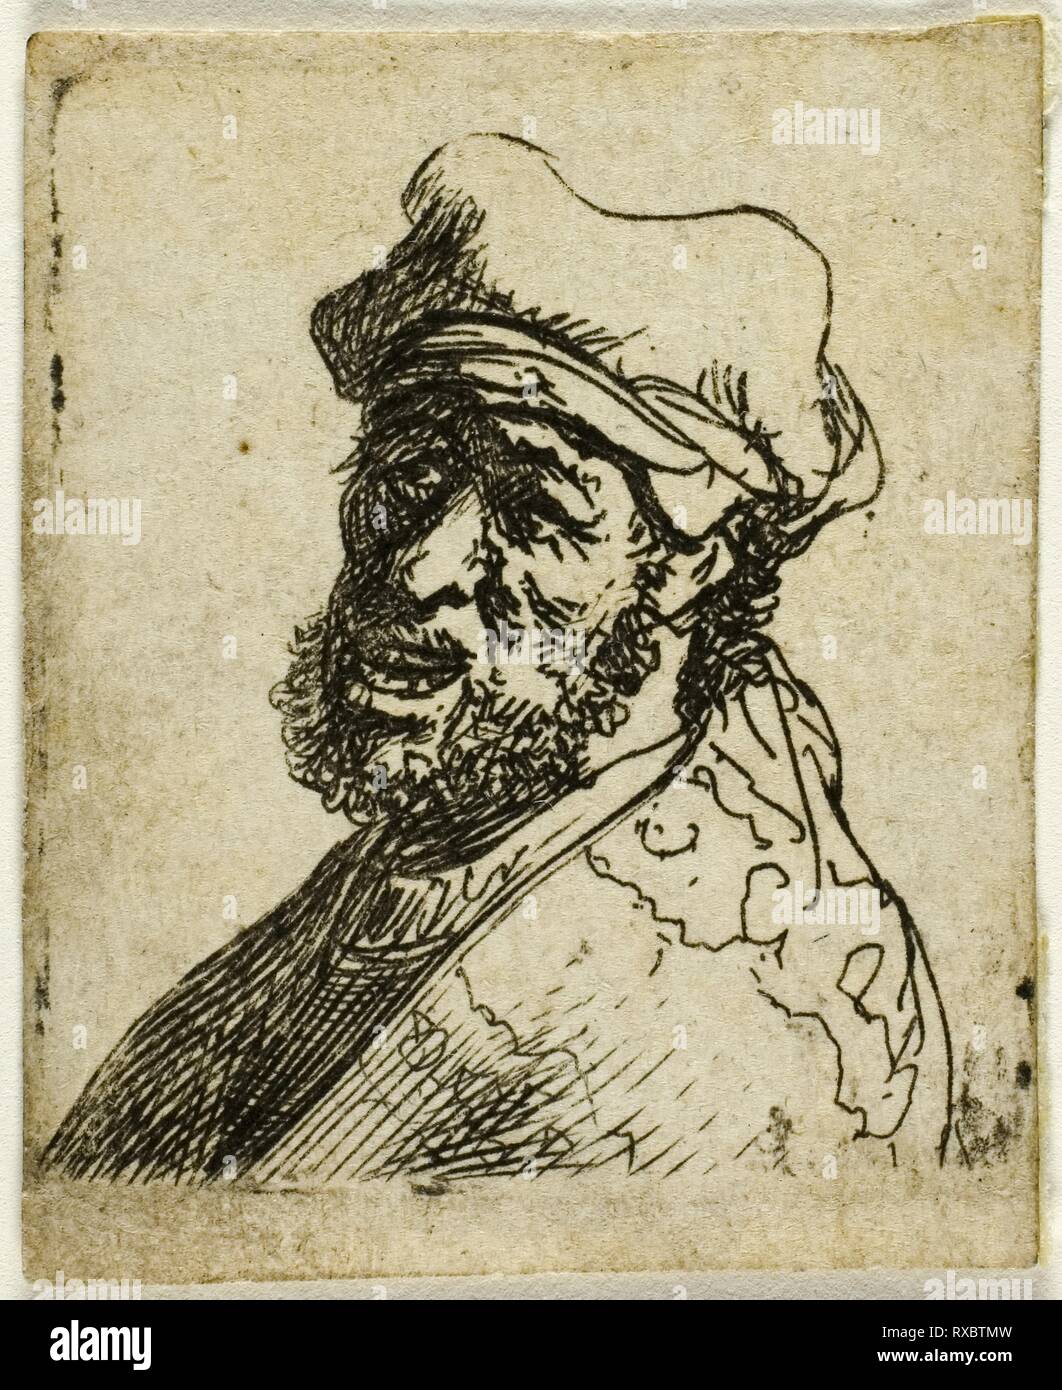 Man Crying Out, Three Quarters Left: Bust. Rembrandt van Rijn; Dutch, 1606-1669. Date: 1624-1634. Dimensions: 36 x 33.5 mm (image); 40 x 34 mm (plate); 43 x 35 mm (sheet). Etching on paper. Origin: Holland. Museum: The Chicago Art Institute. Author: REMBRANDT HARMENSZOON VAN RIJN. Stock Photo